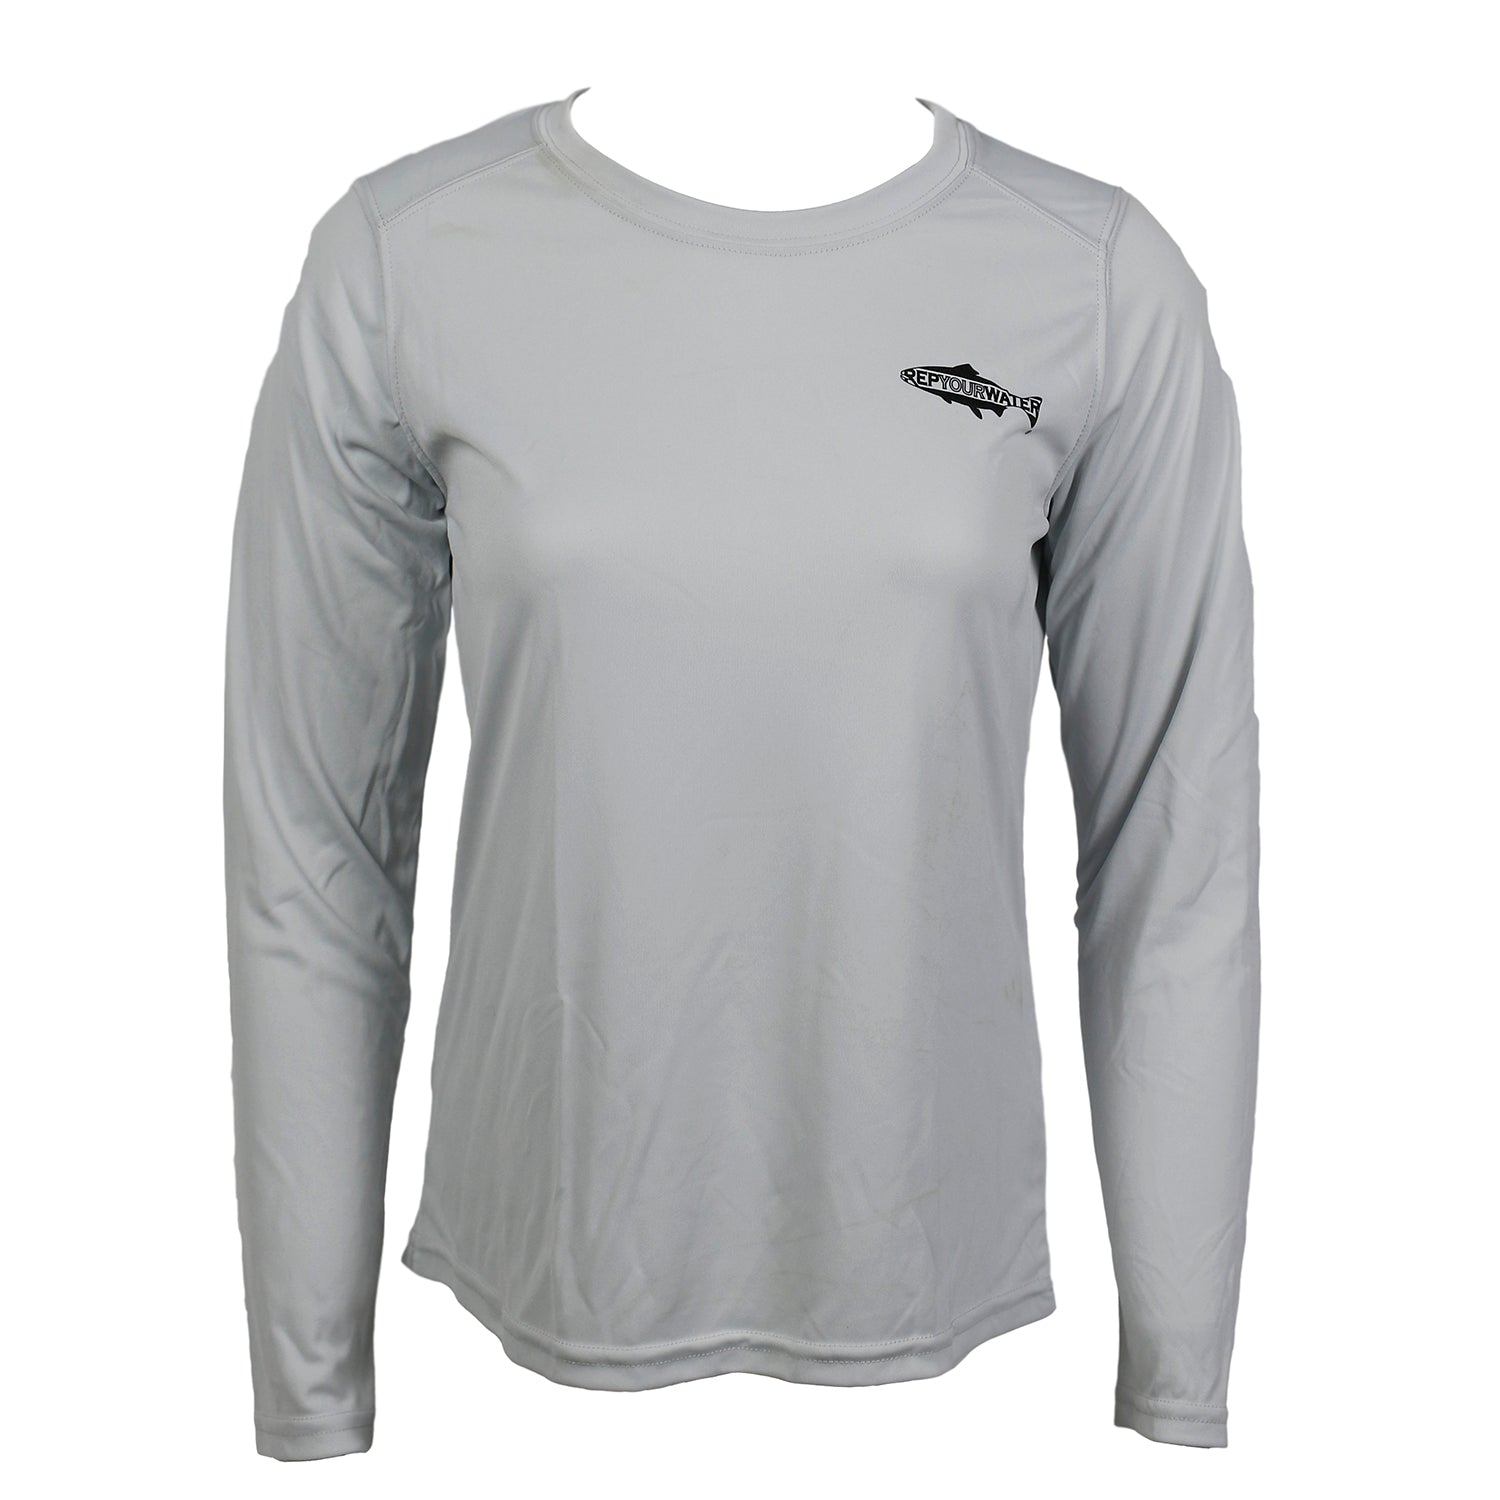 The front of a longsleeved shirt with a logo on the front chest that says repyourwater inside a trout silhouette